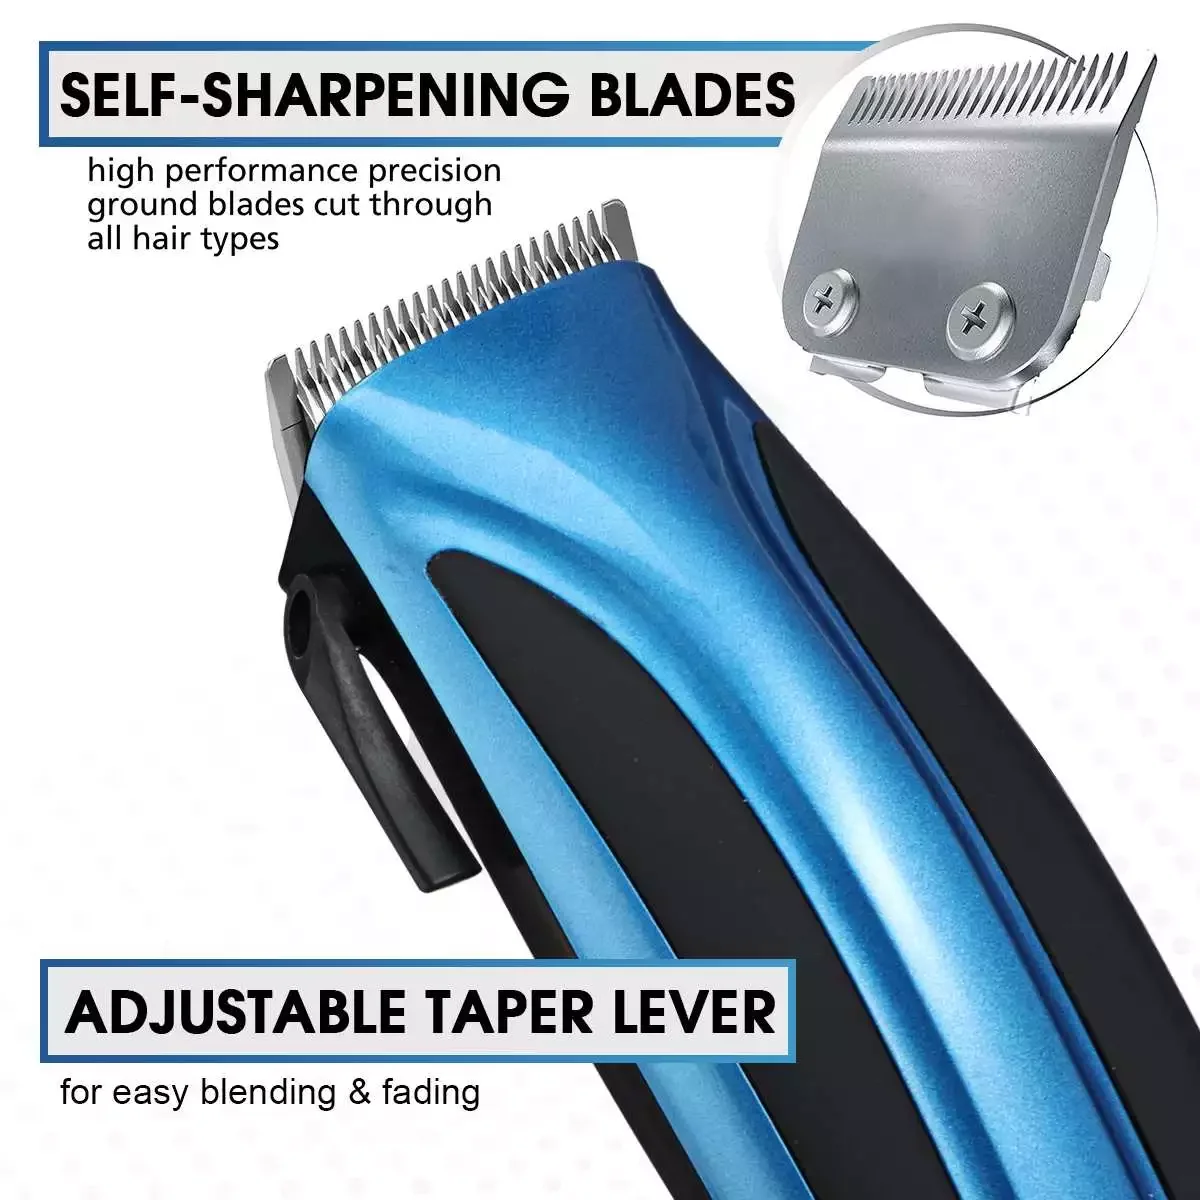 

NEW2023 Corded Beard Trimmer Hair Trimmer Barber Clippers Haircut Kit with Clipper Guide Combs Scissors for Family Use